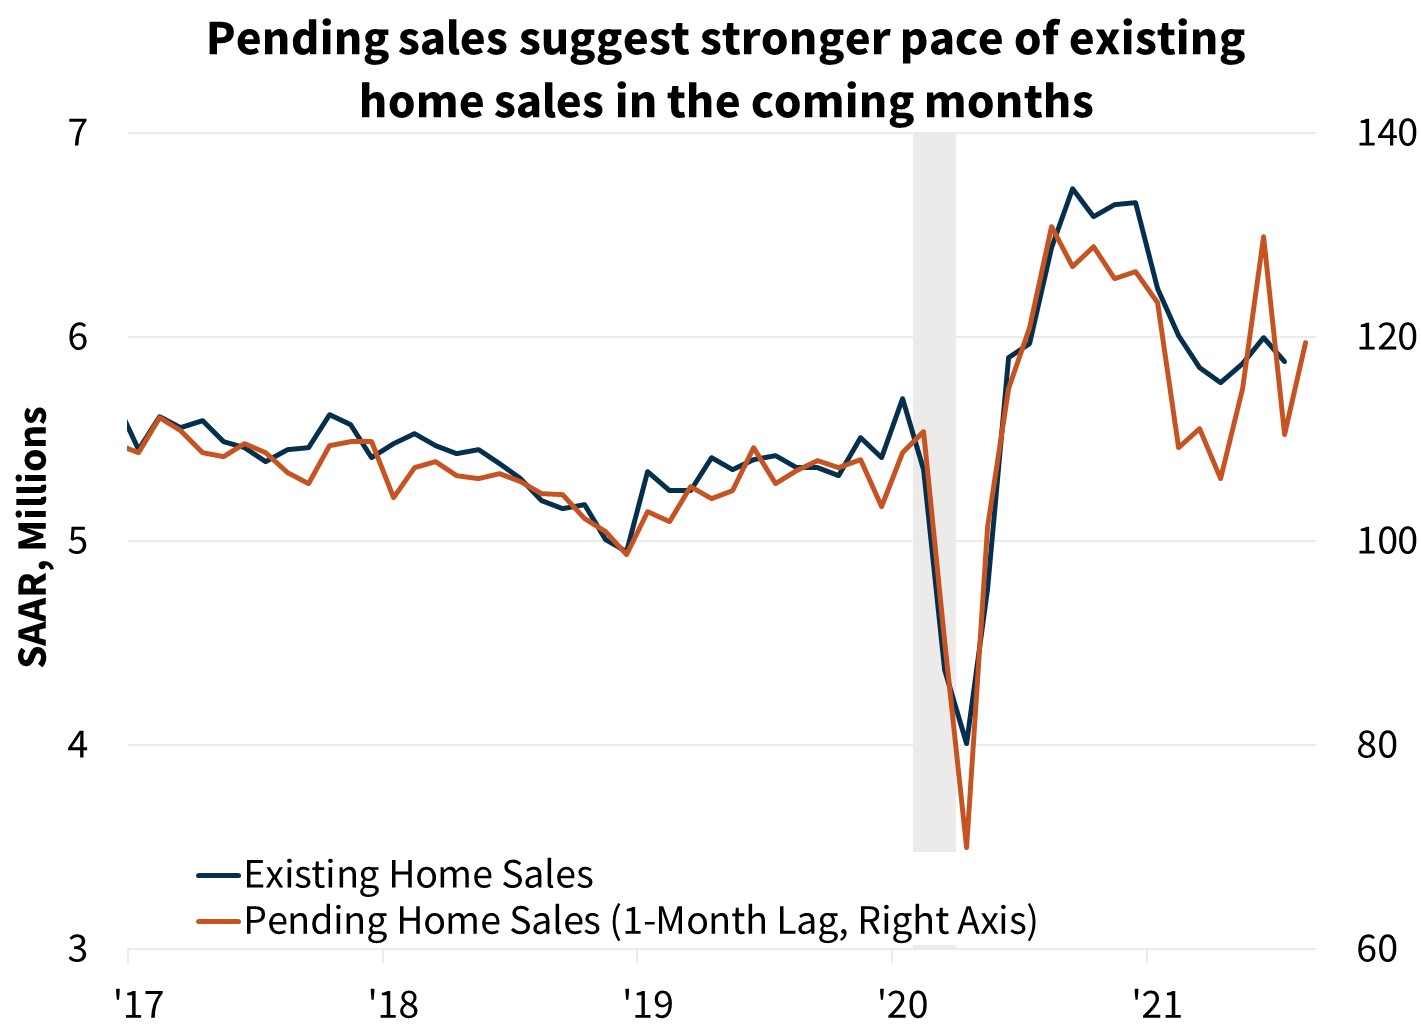  Pending sales suggest stronger pace of existing home sales in coming months 